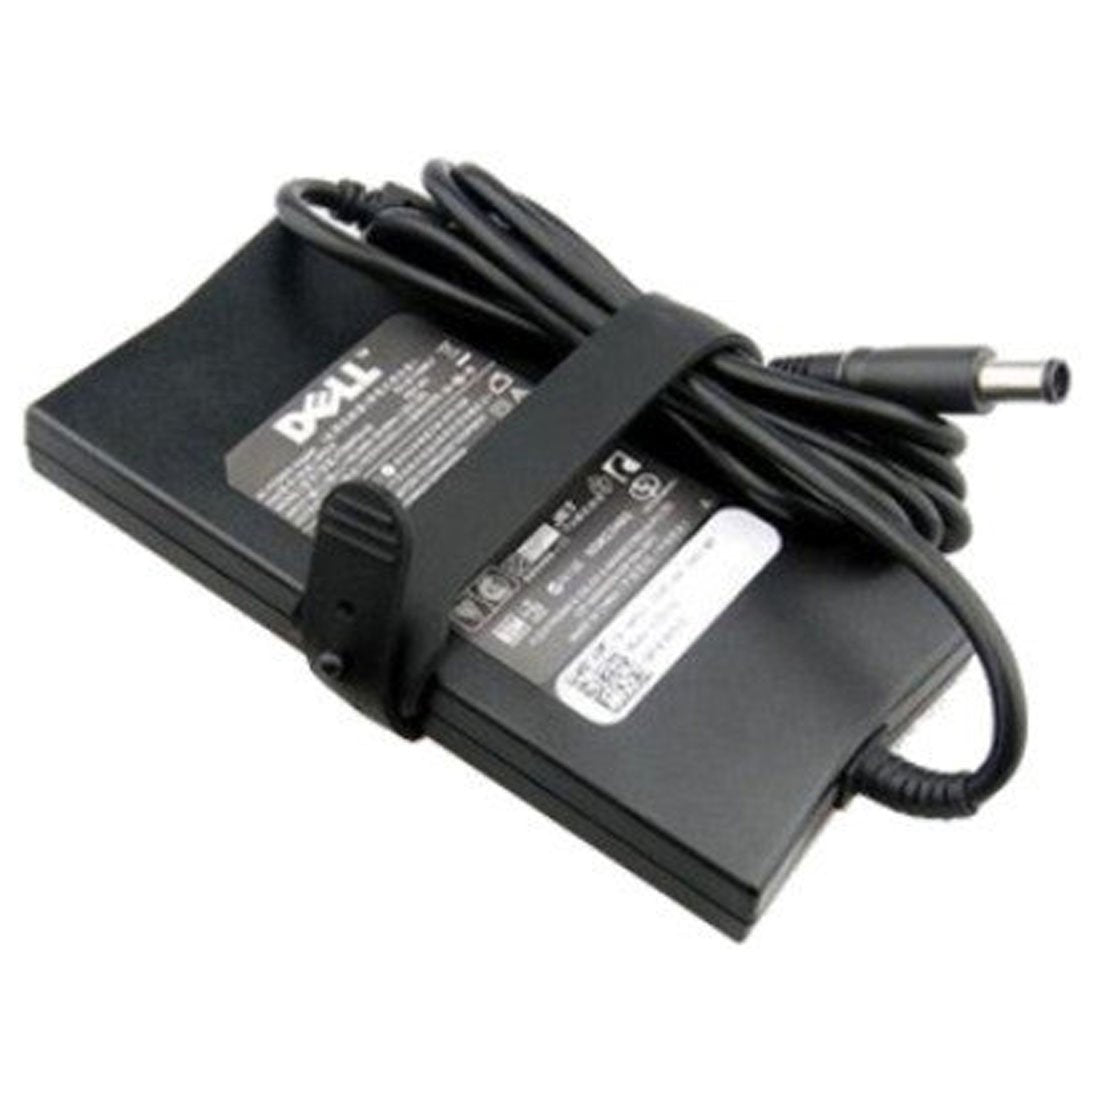 Dell Original 130W 19.5V 7.4mm Pin Laptop Charger Adapter for Vostro V13 With Power Cord